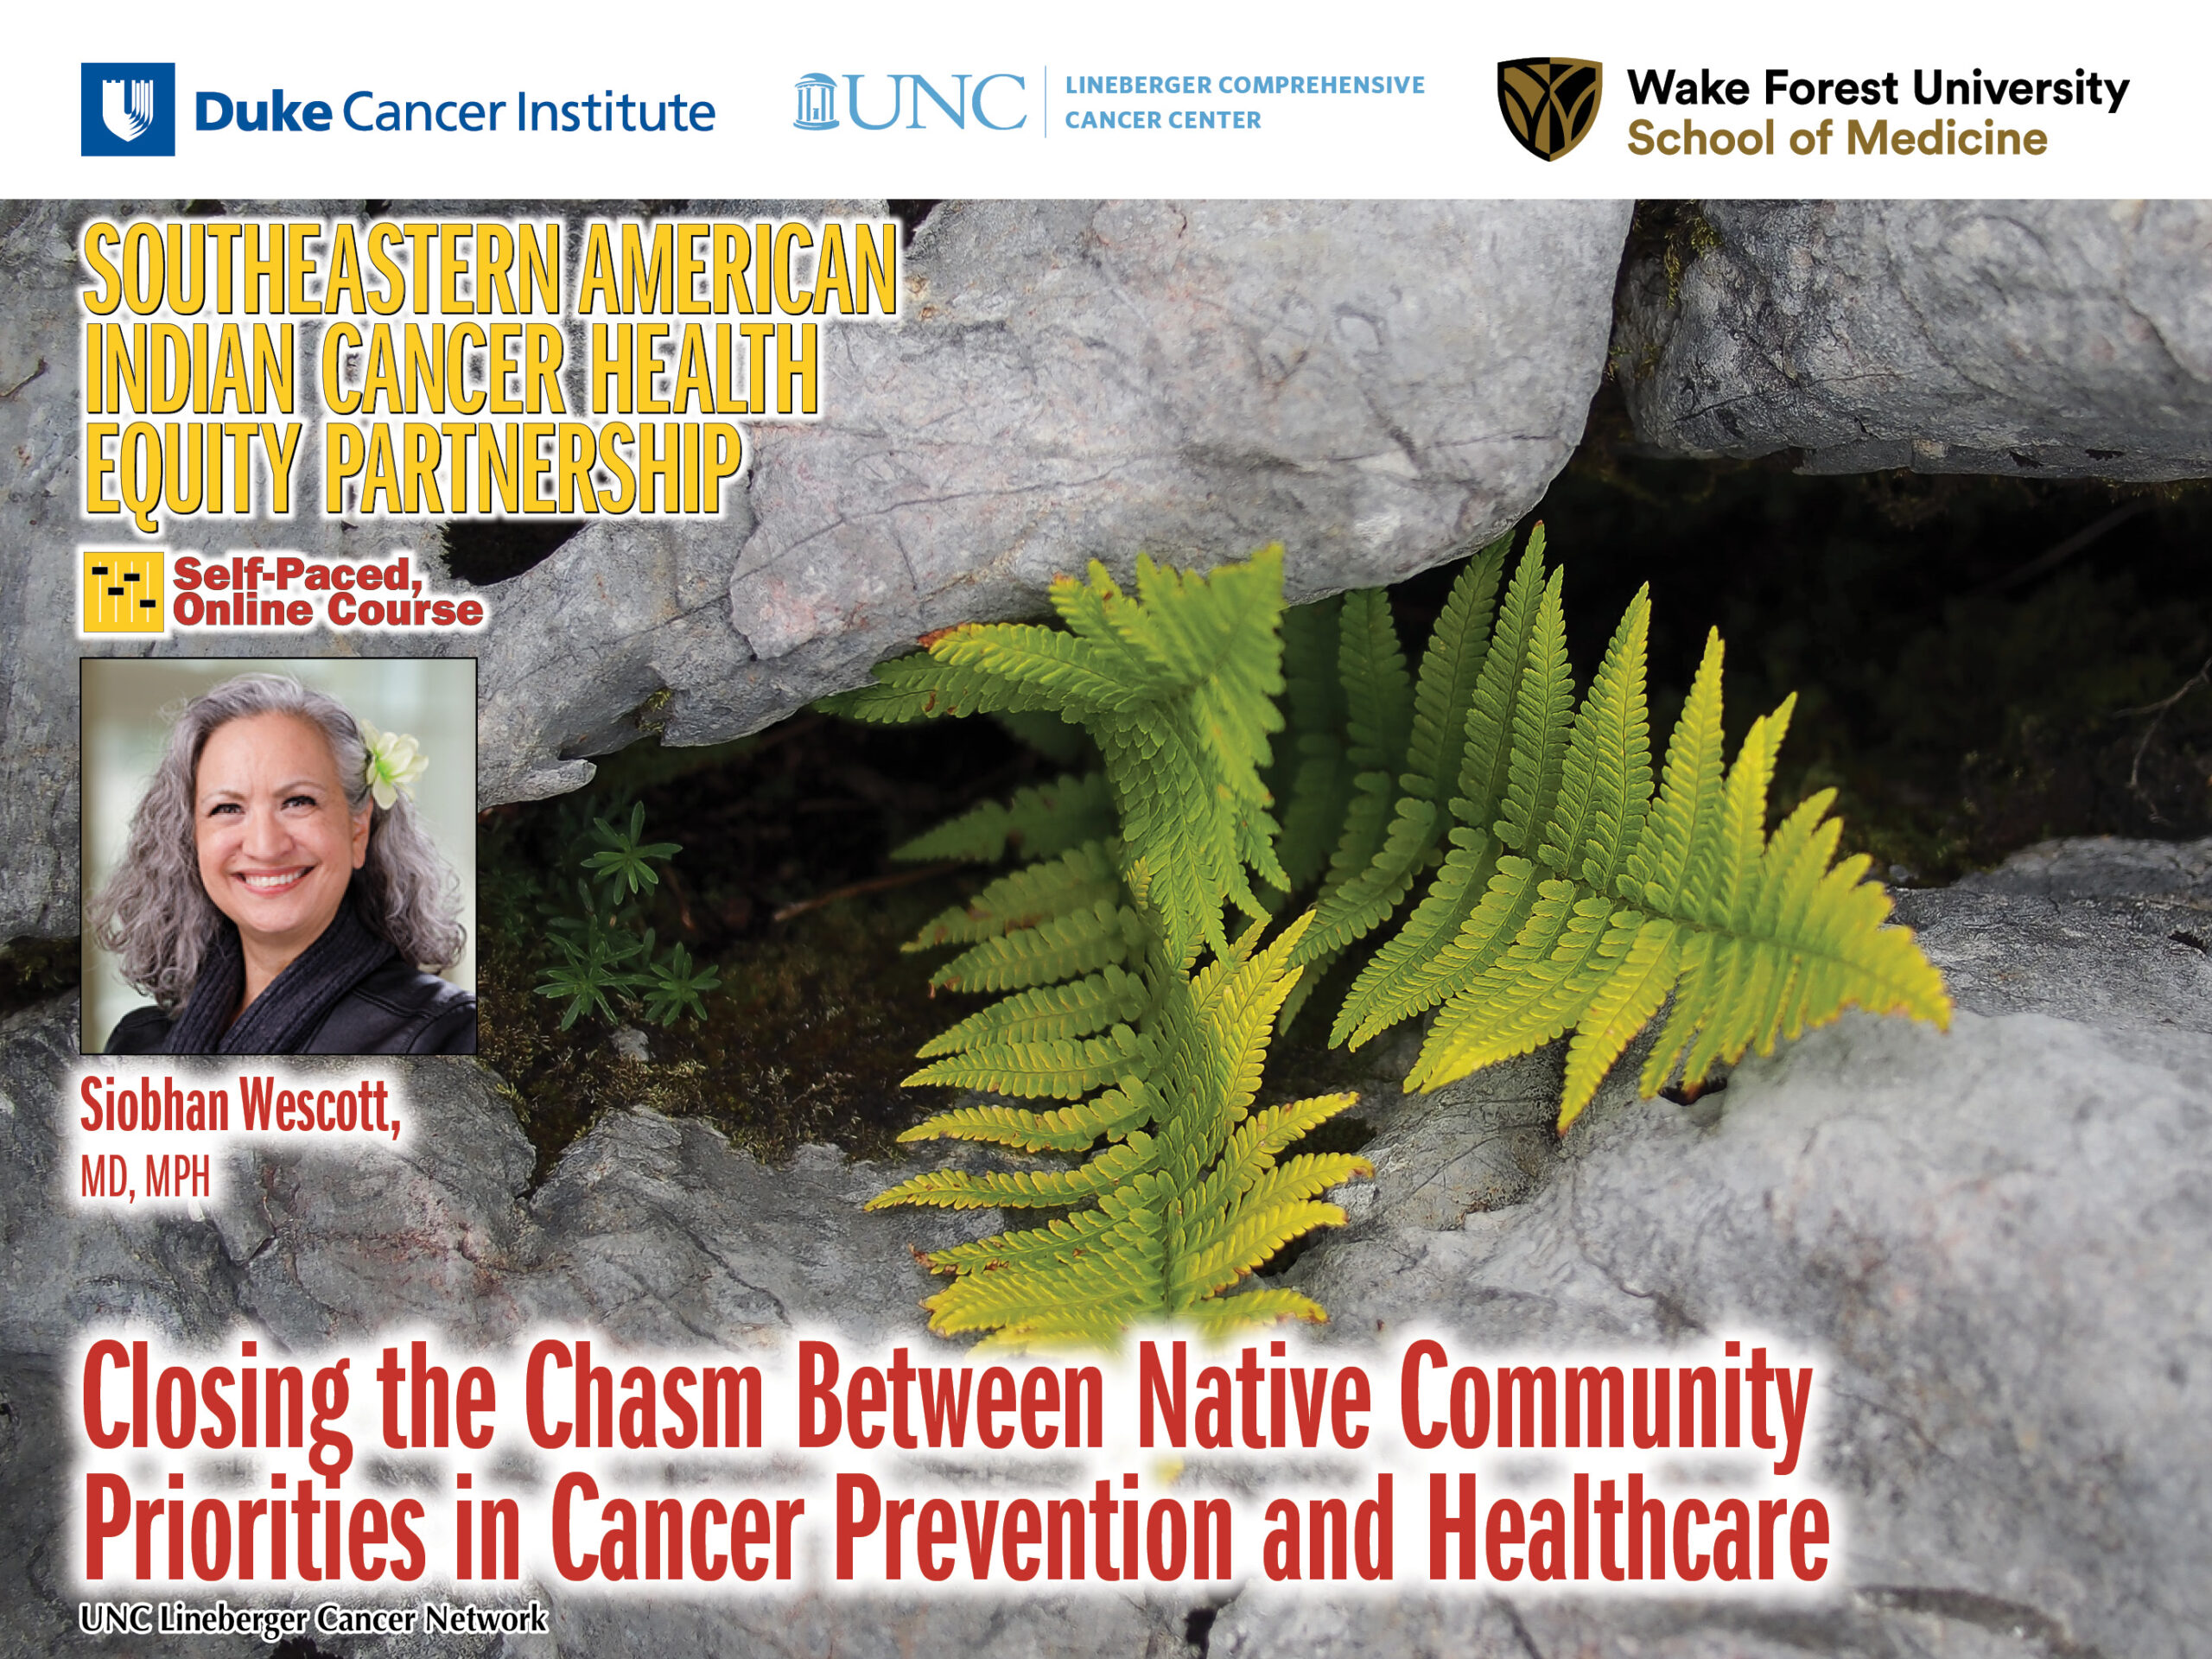 Closing the Chasm Between Native Community Priorities in Cancer Prevention and Healthcare Research Priorities